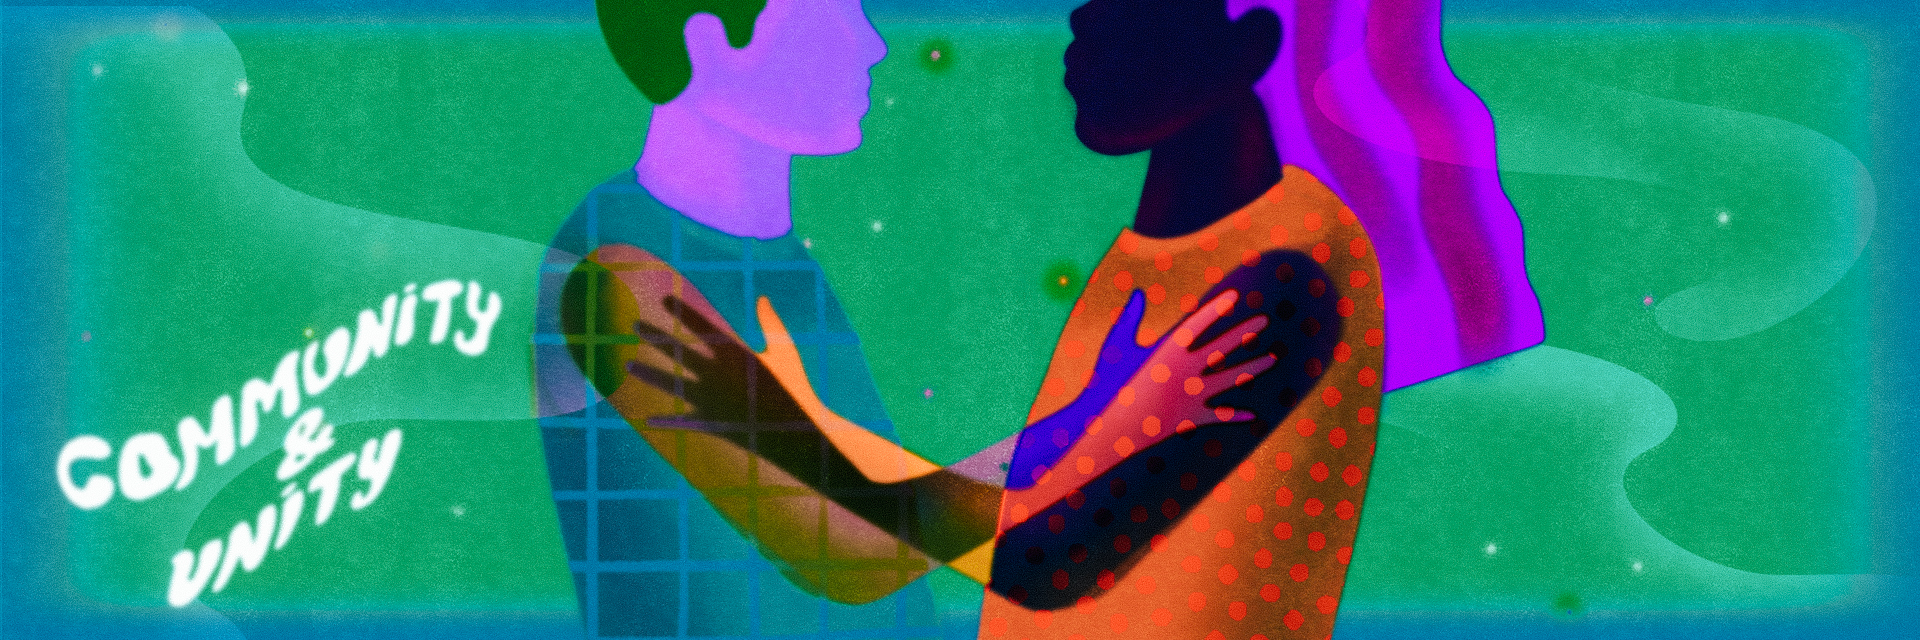 “Community and Unity” category artwork: Two people with linked arms